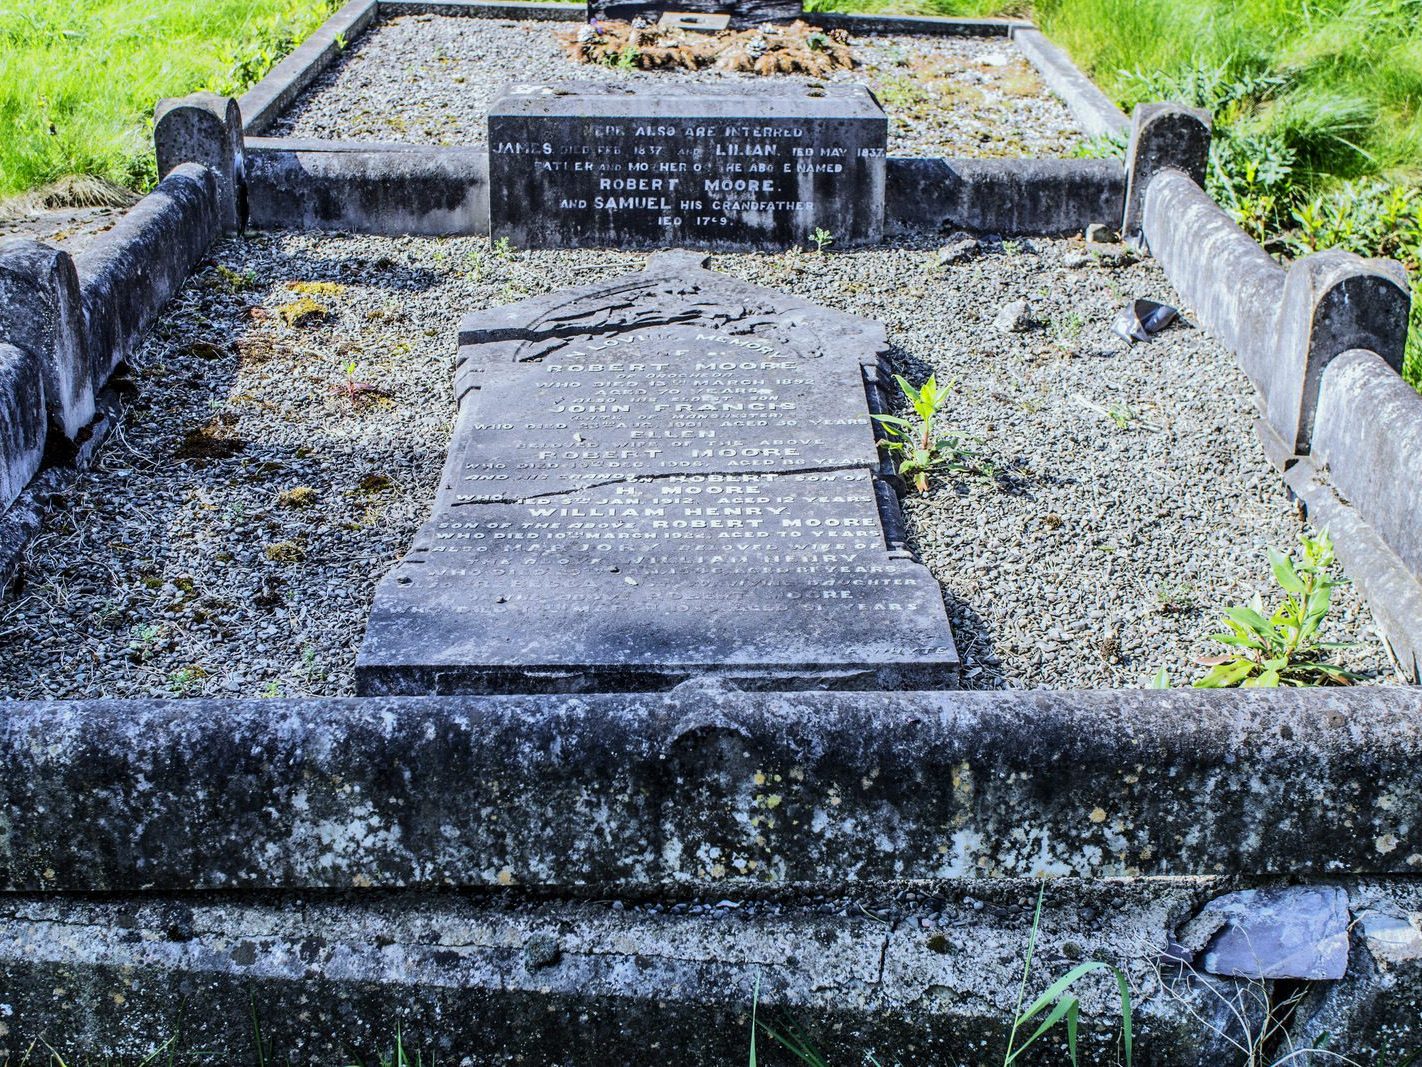 SOME OLD IMAGES OF ST PETERS CHURCHYARD IN DROGHEDA [PHOTOGRAPHED 20212]-224230-1